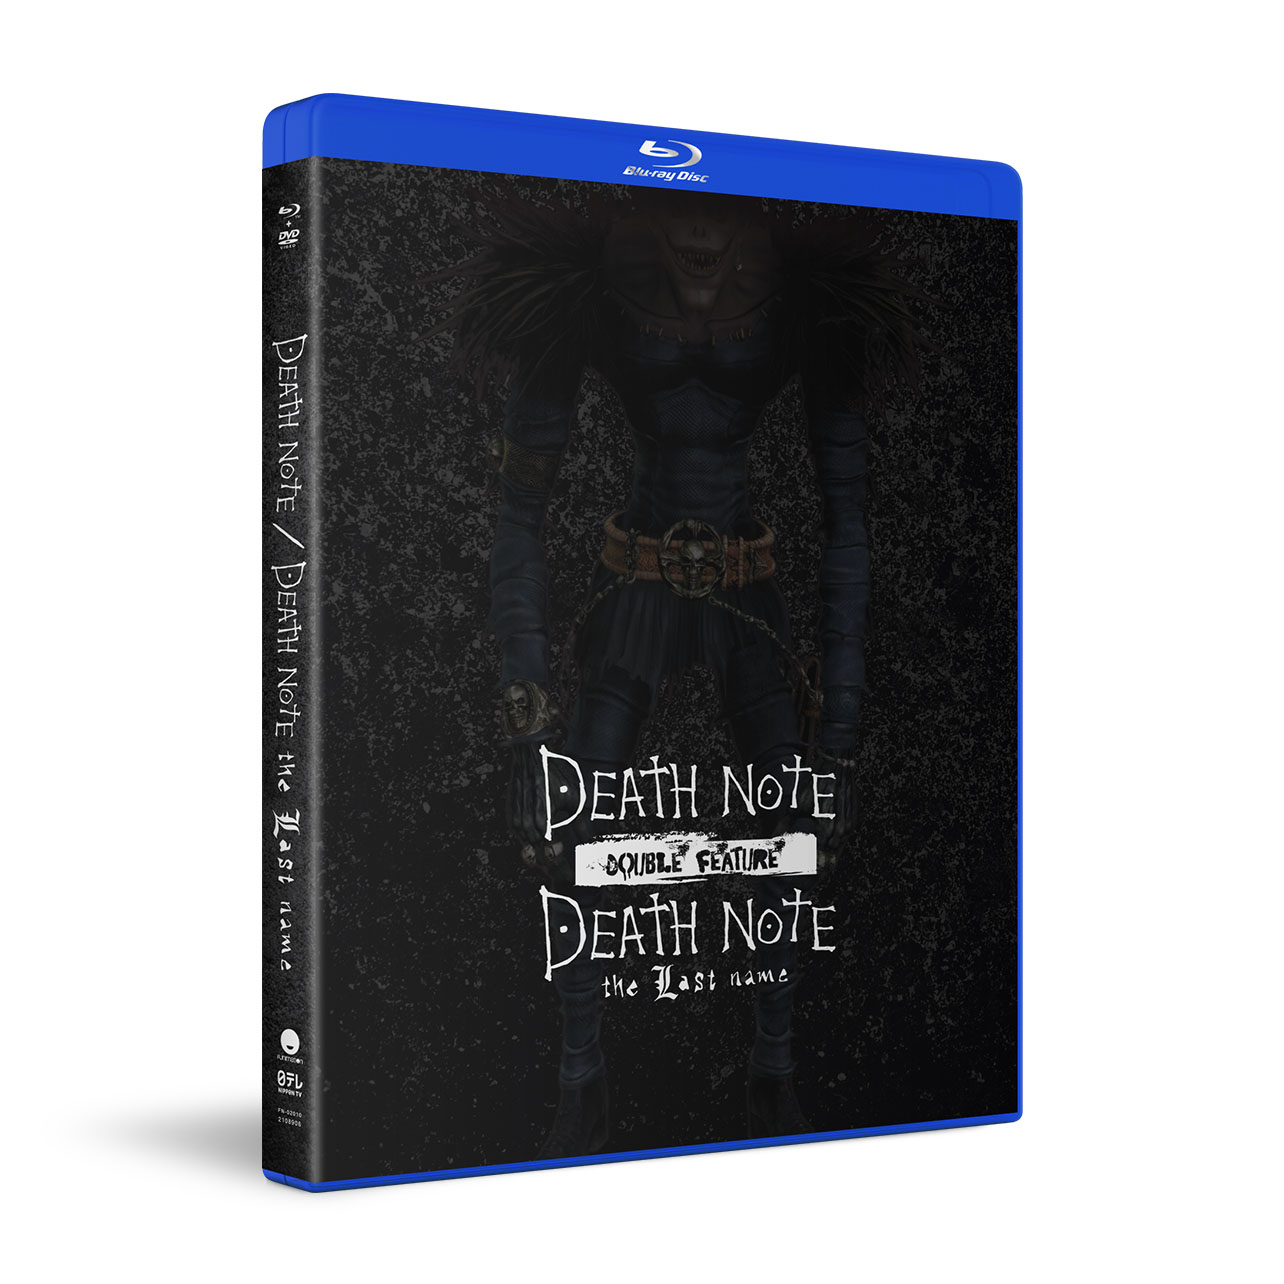 Death Note - Live Action Movies 1 & 2 - Blu-ray + DVD image count 2